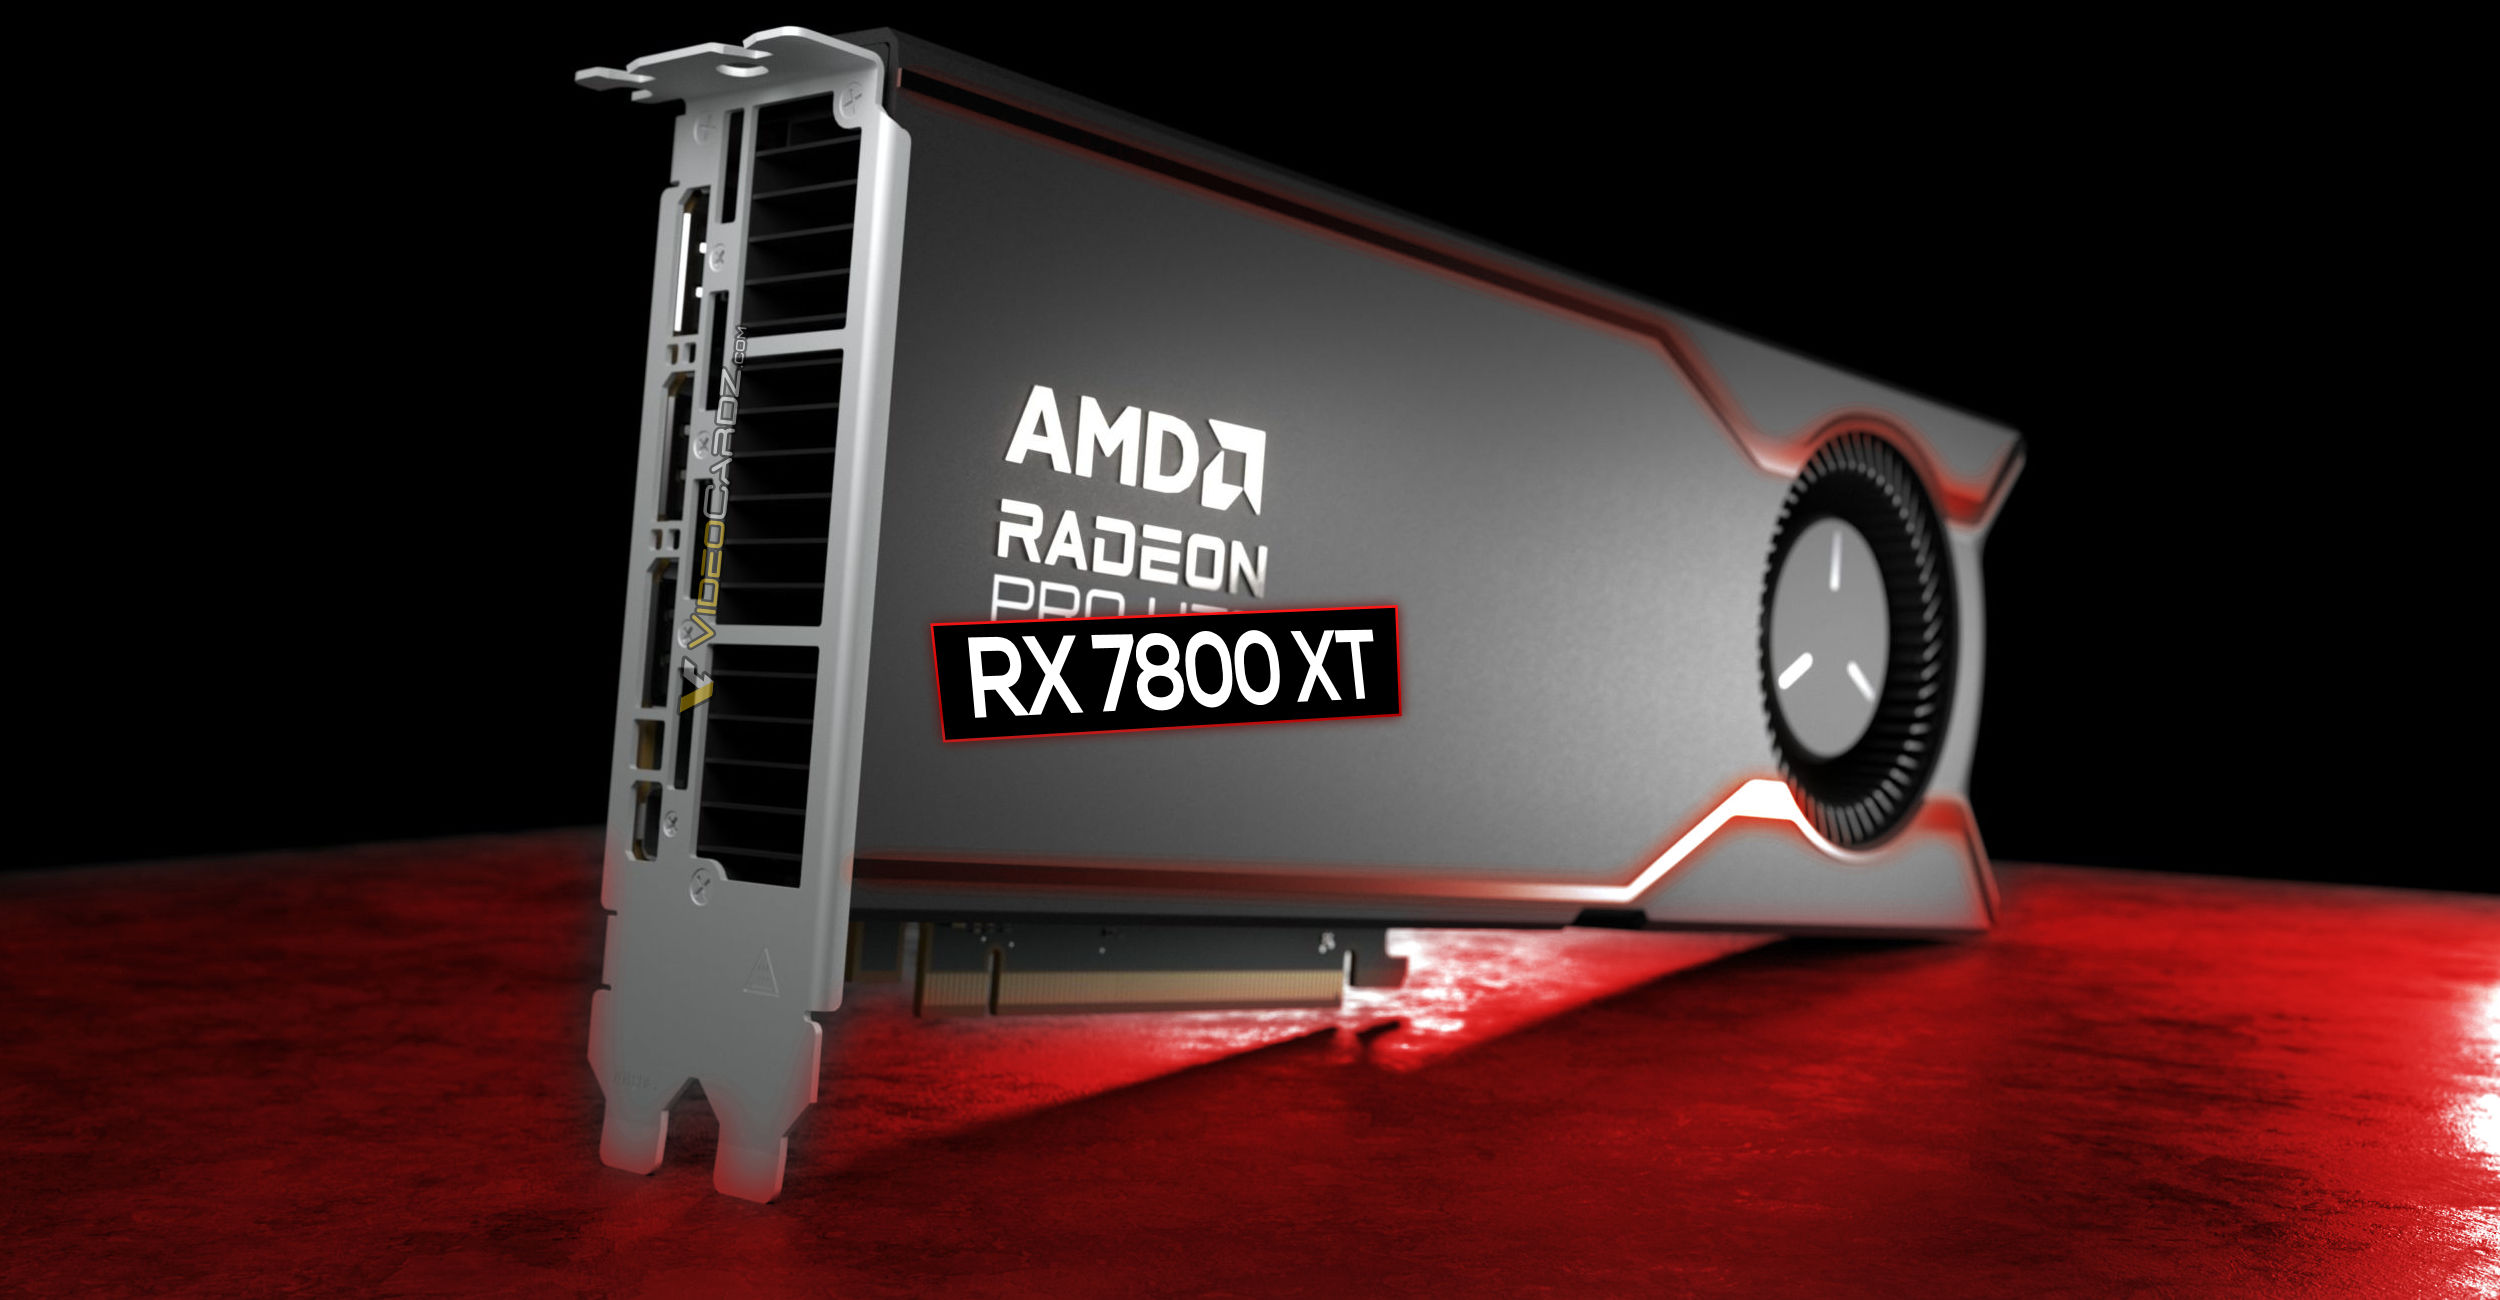 Simulated Radeon RX 7800 XT GPU ends up 4% to 13% faster than RX 6800 XT 